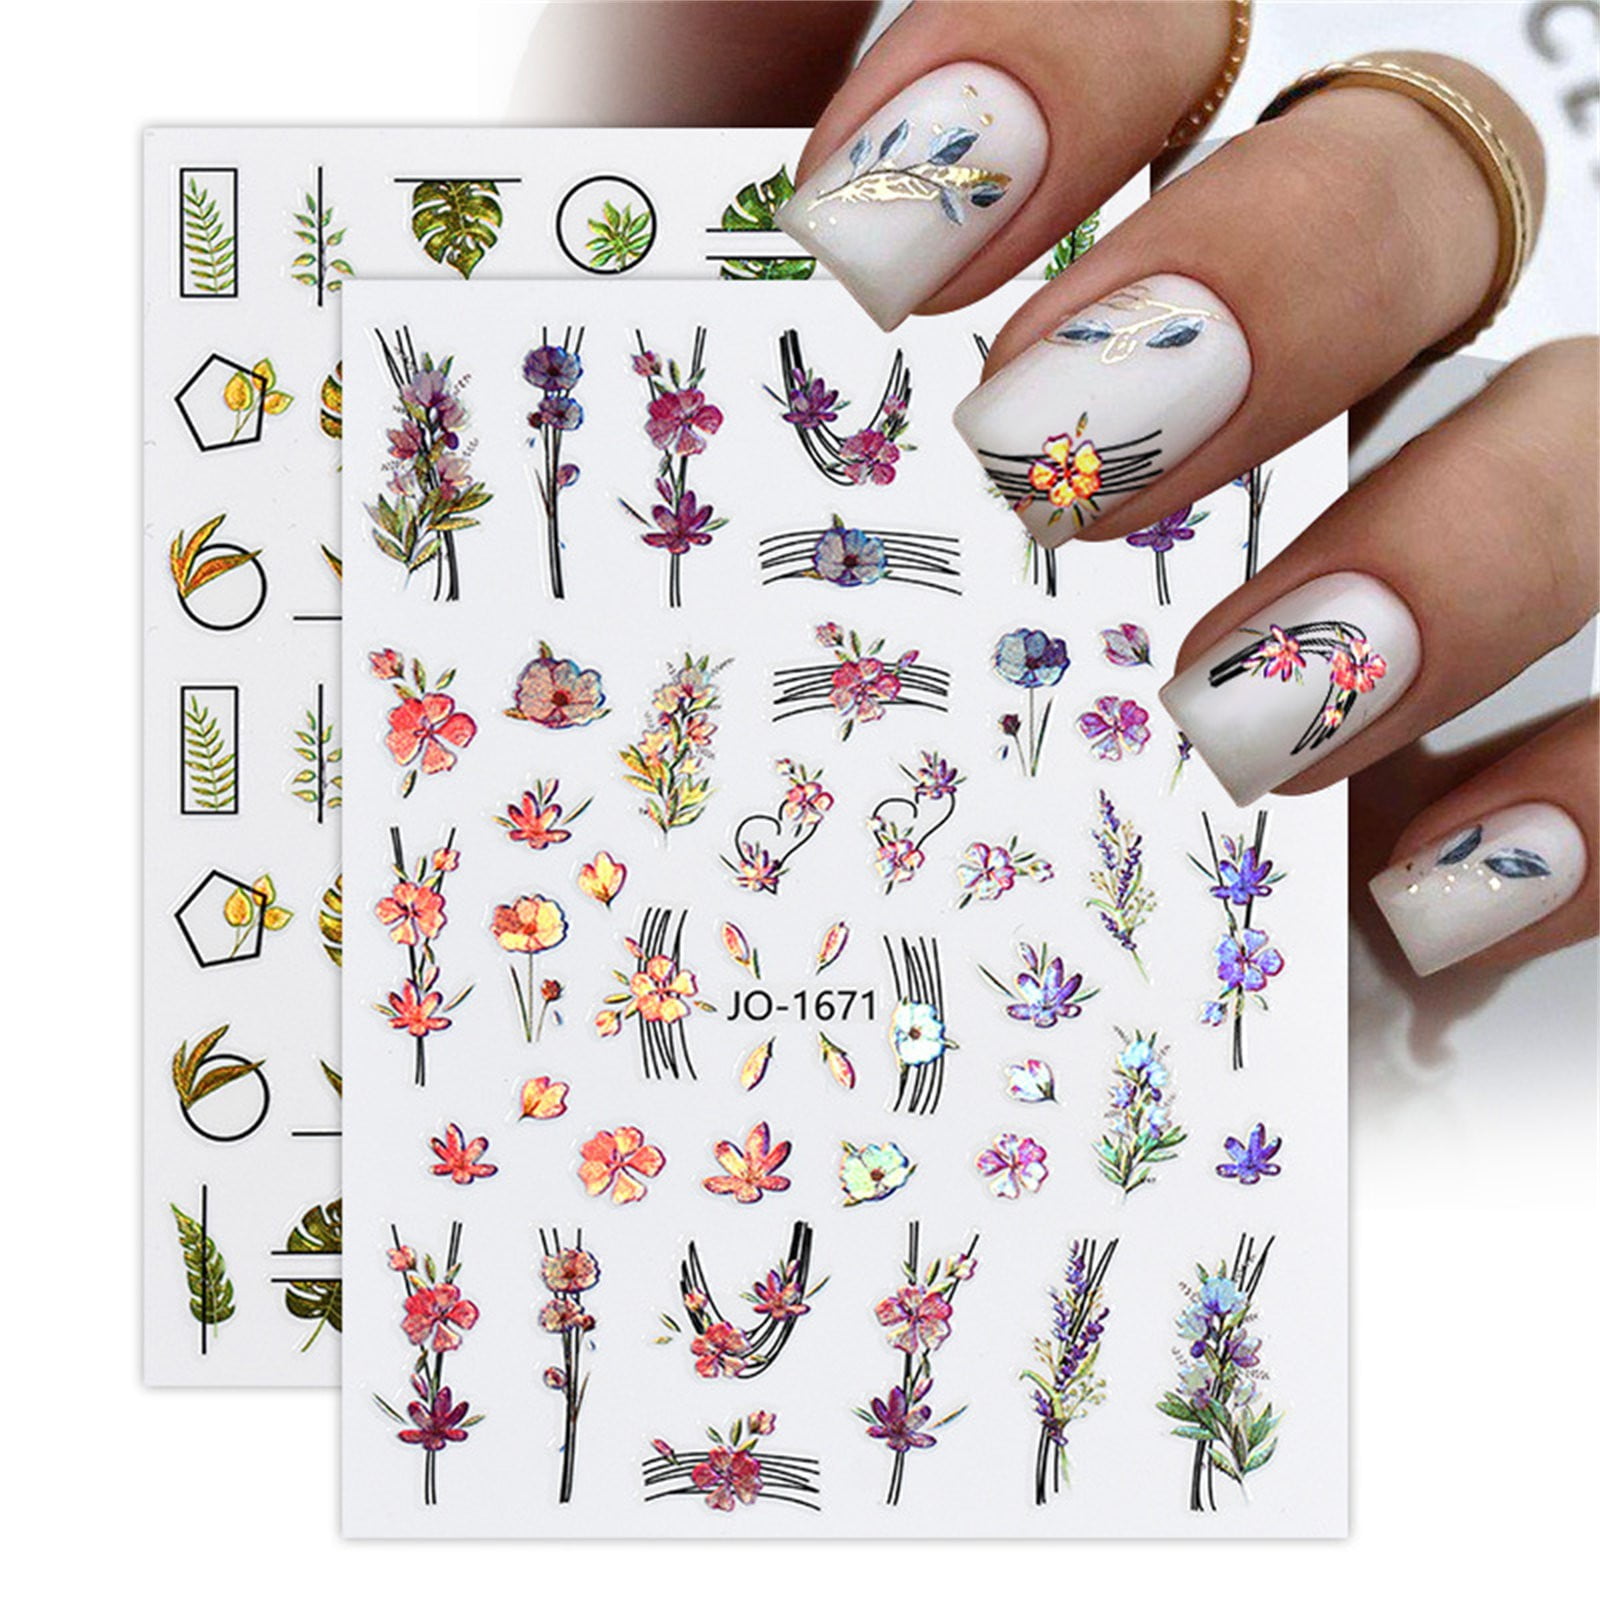 1PC 3D Sunflower Nail Stickers Daisy Blossom Florals Fashion DIY Nail Art  Flower Design Decals Sliders Decorations For Manicure - AliExpress